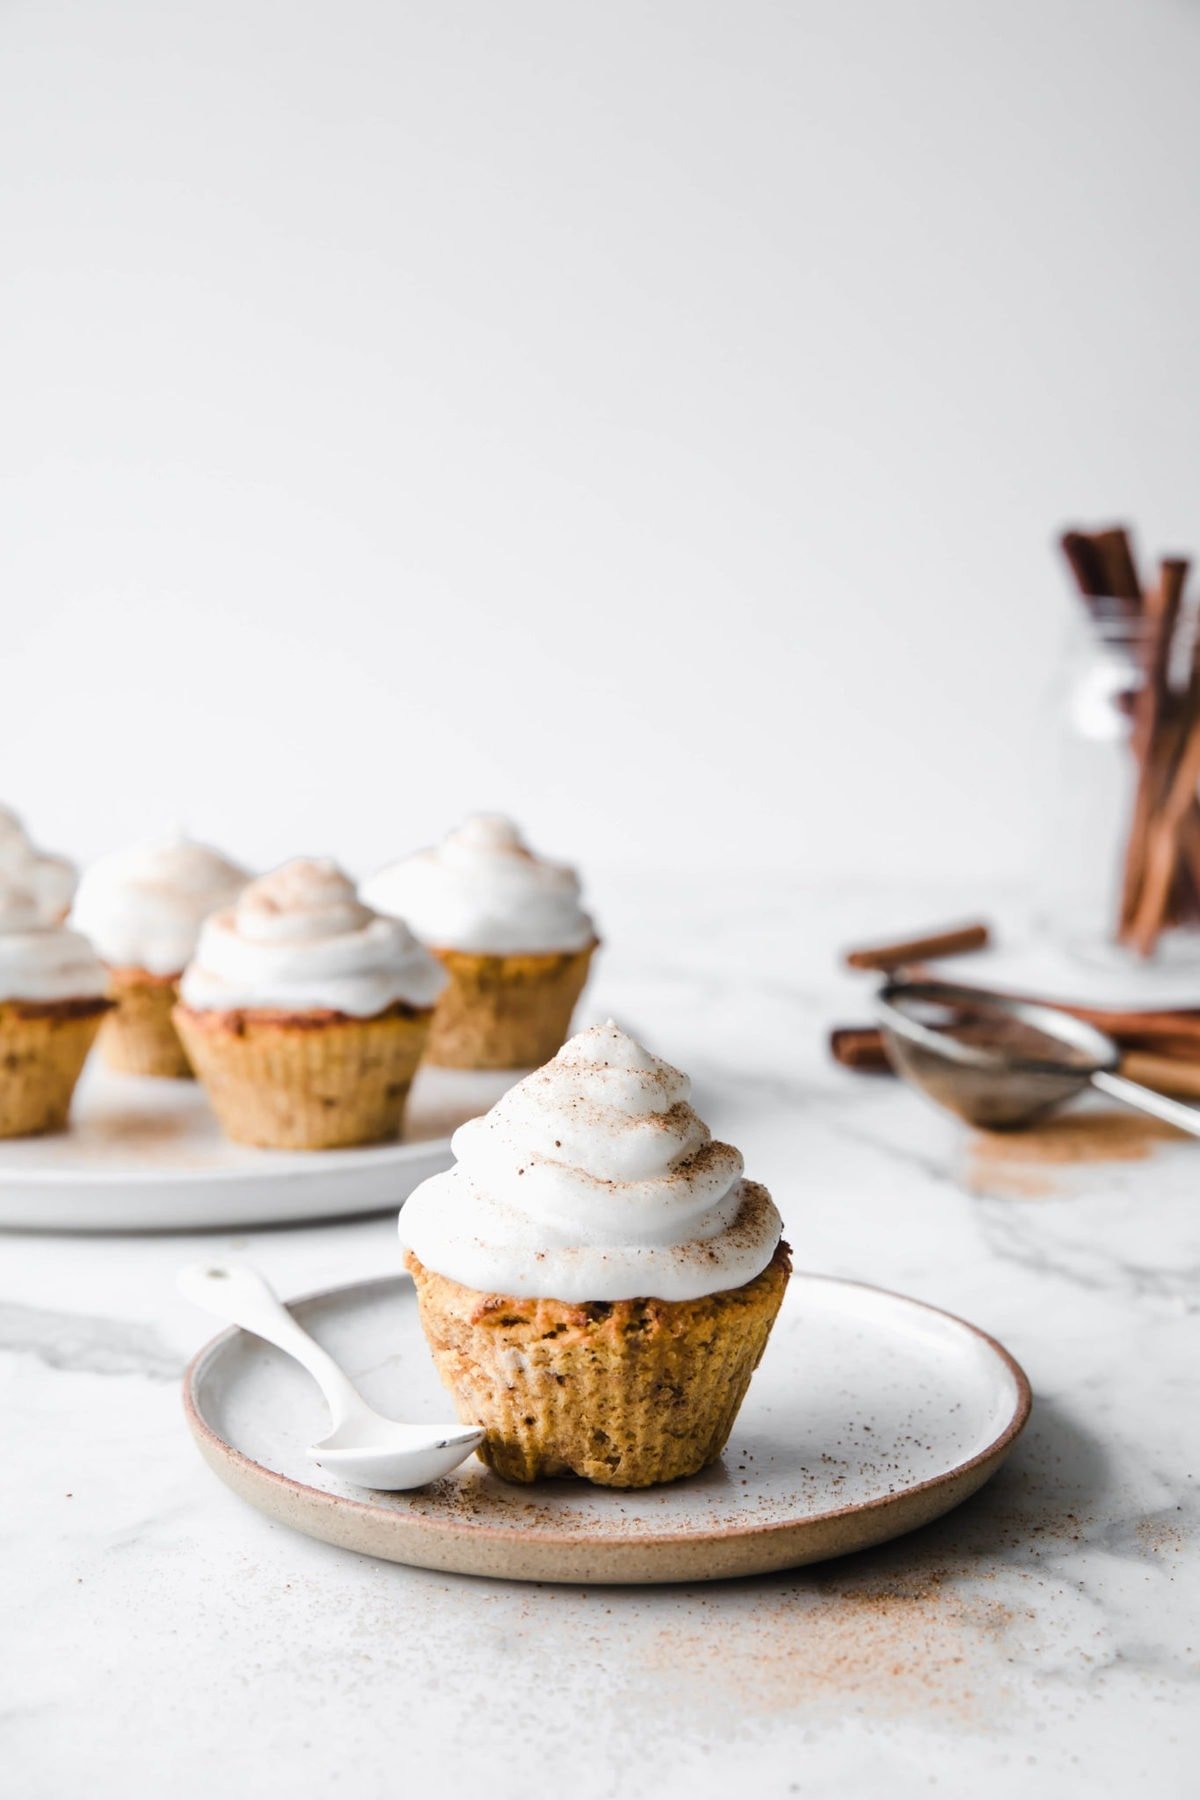 low carb pumpkin spice cupcakes, frosted with marshmallow frosting, served on a porcelain plate, with a spoon